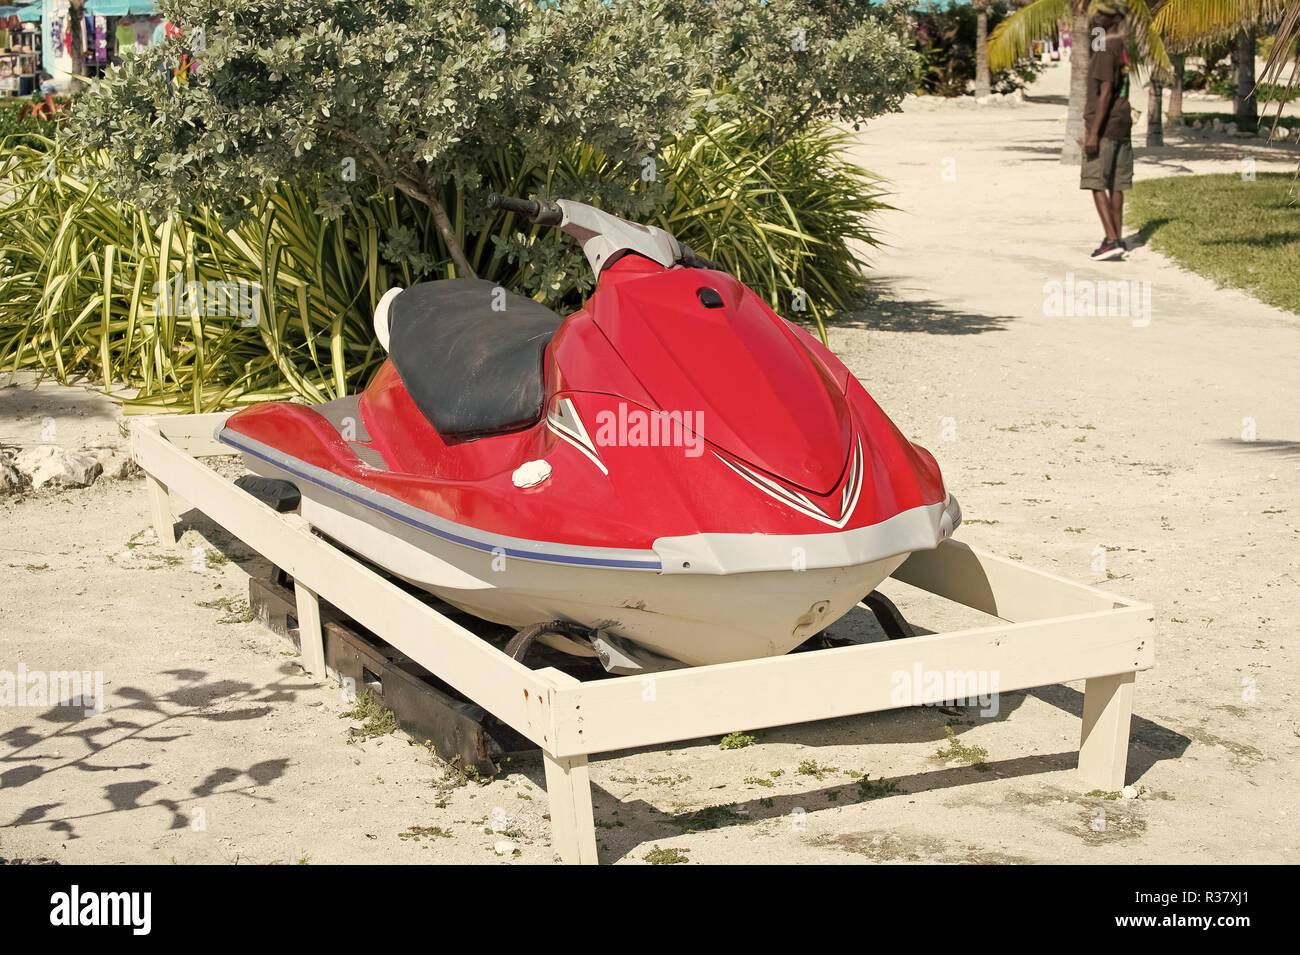 water craft, scooter or jet ski boat, red color motor vessel, parked on ground on sunny day on natural background. Summer vacation. Recreation and sport. Active lifestyle Stock Photo